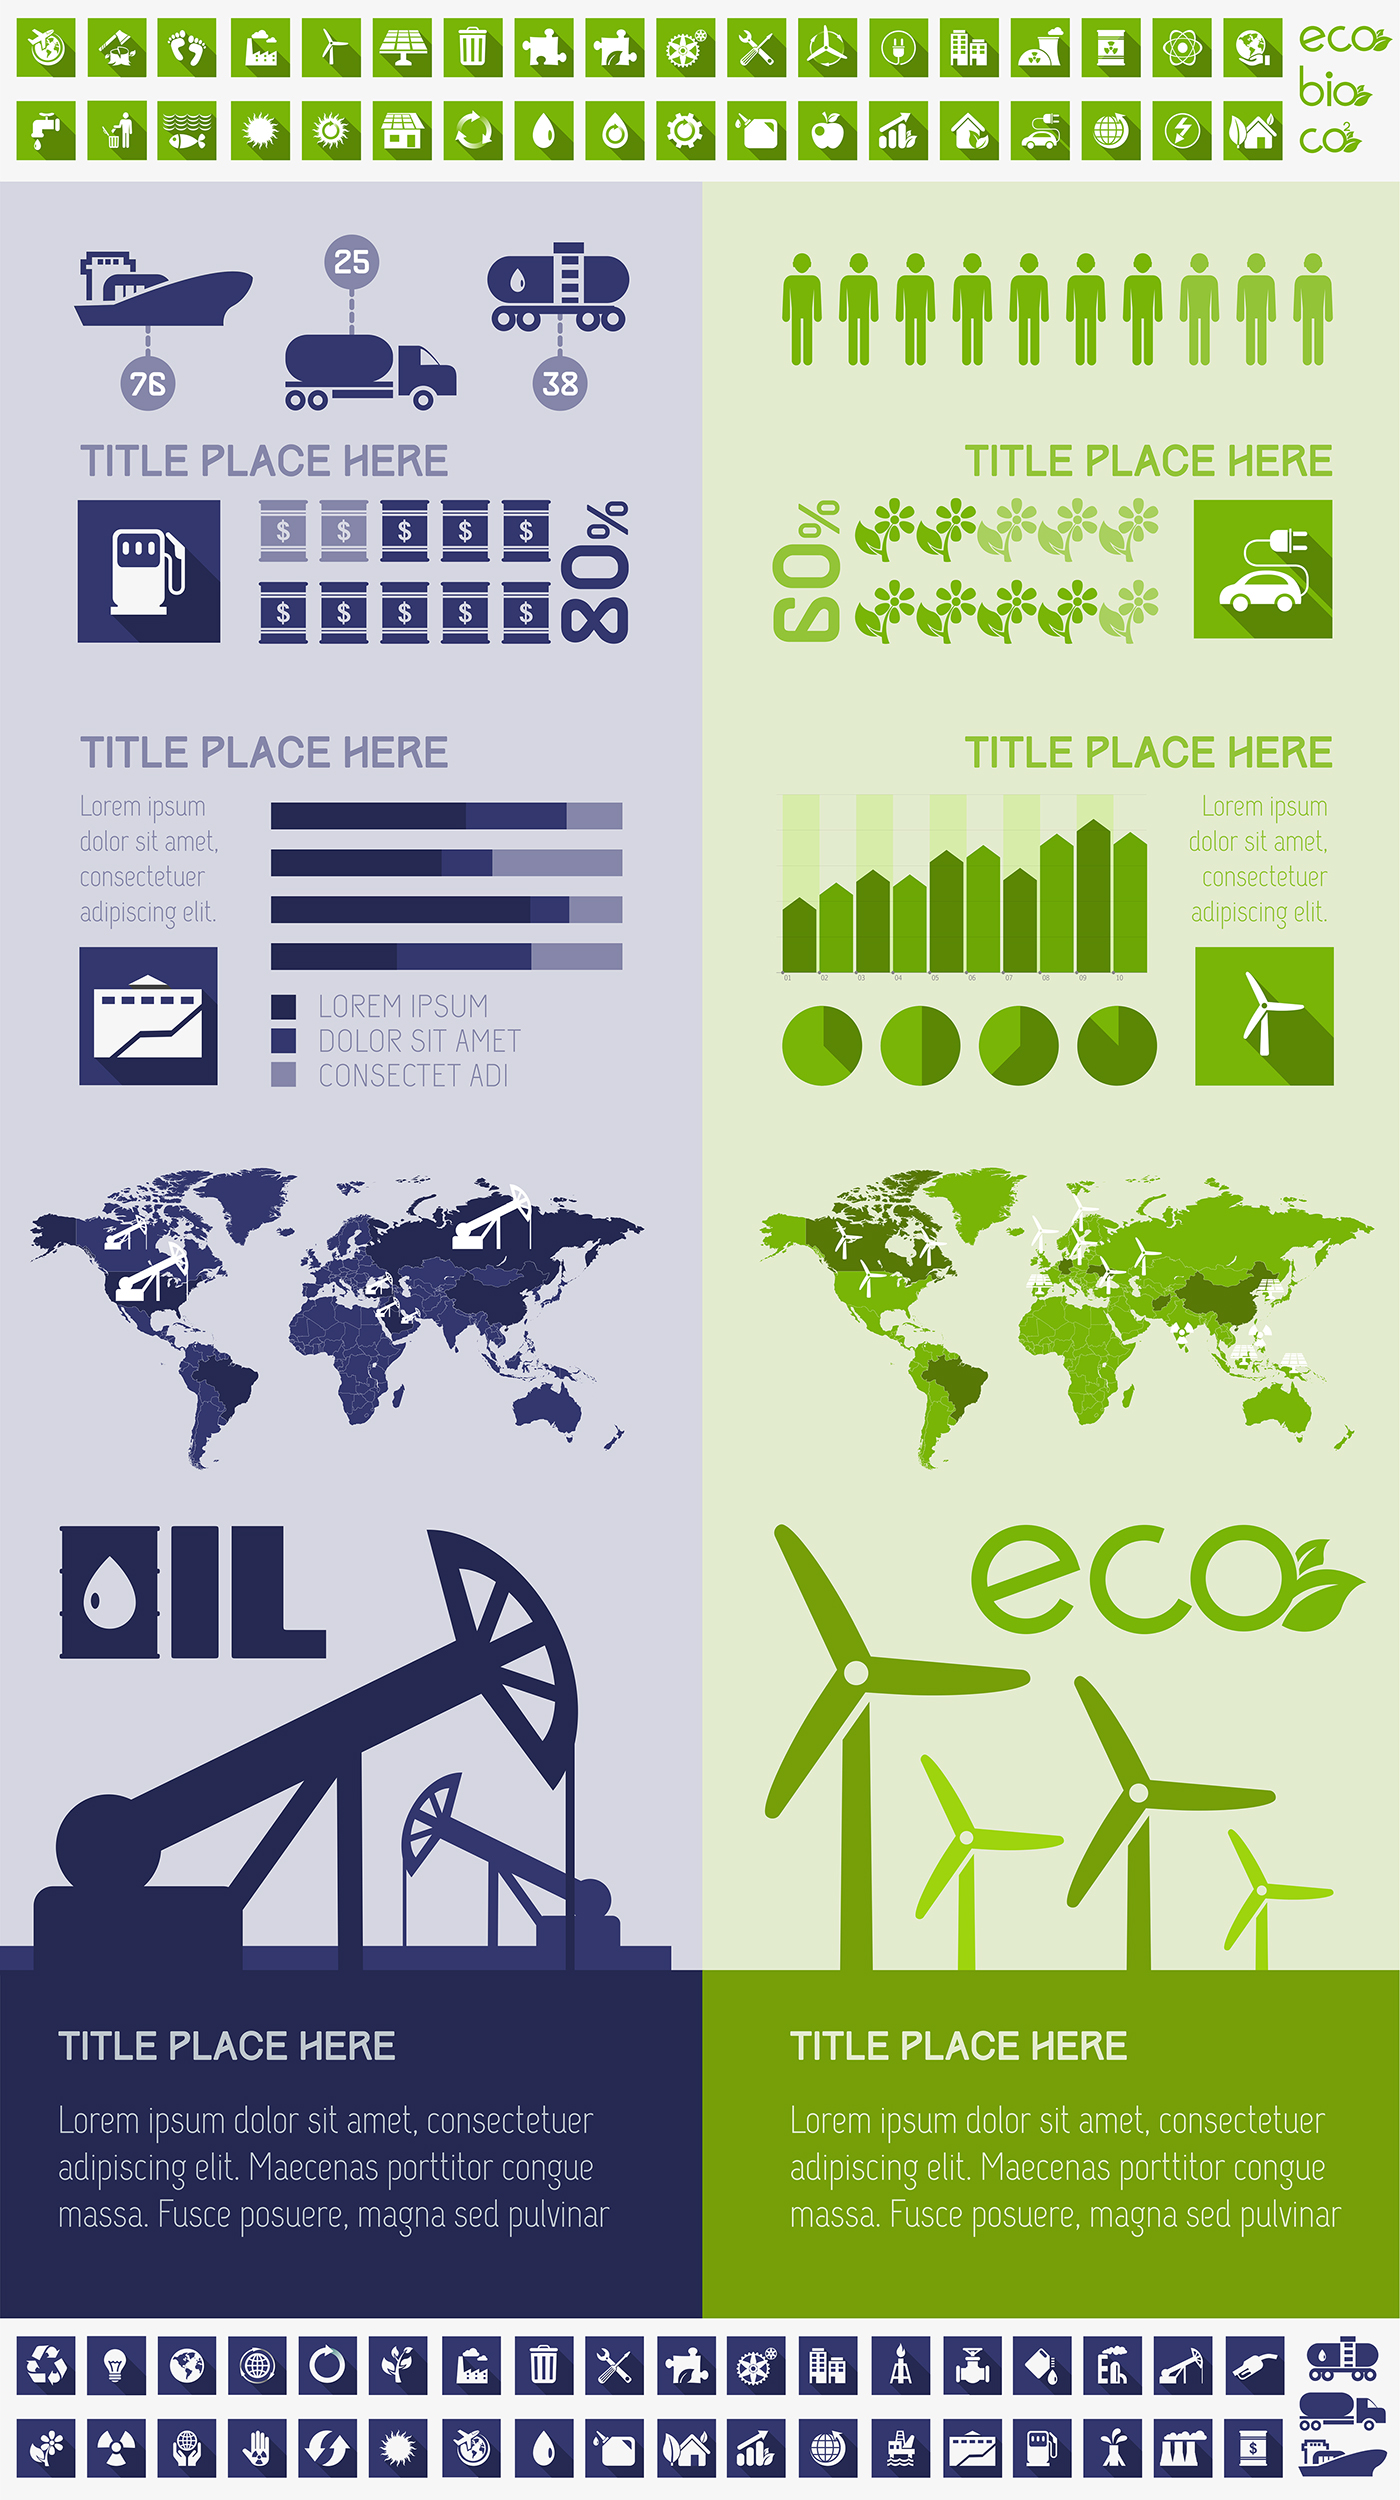 Modern Ecosystem Infographic With Flat Design | Ecology design, Infographic, Infographic design ...